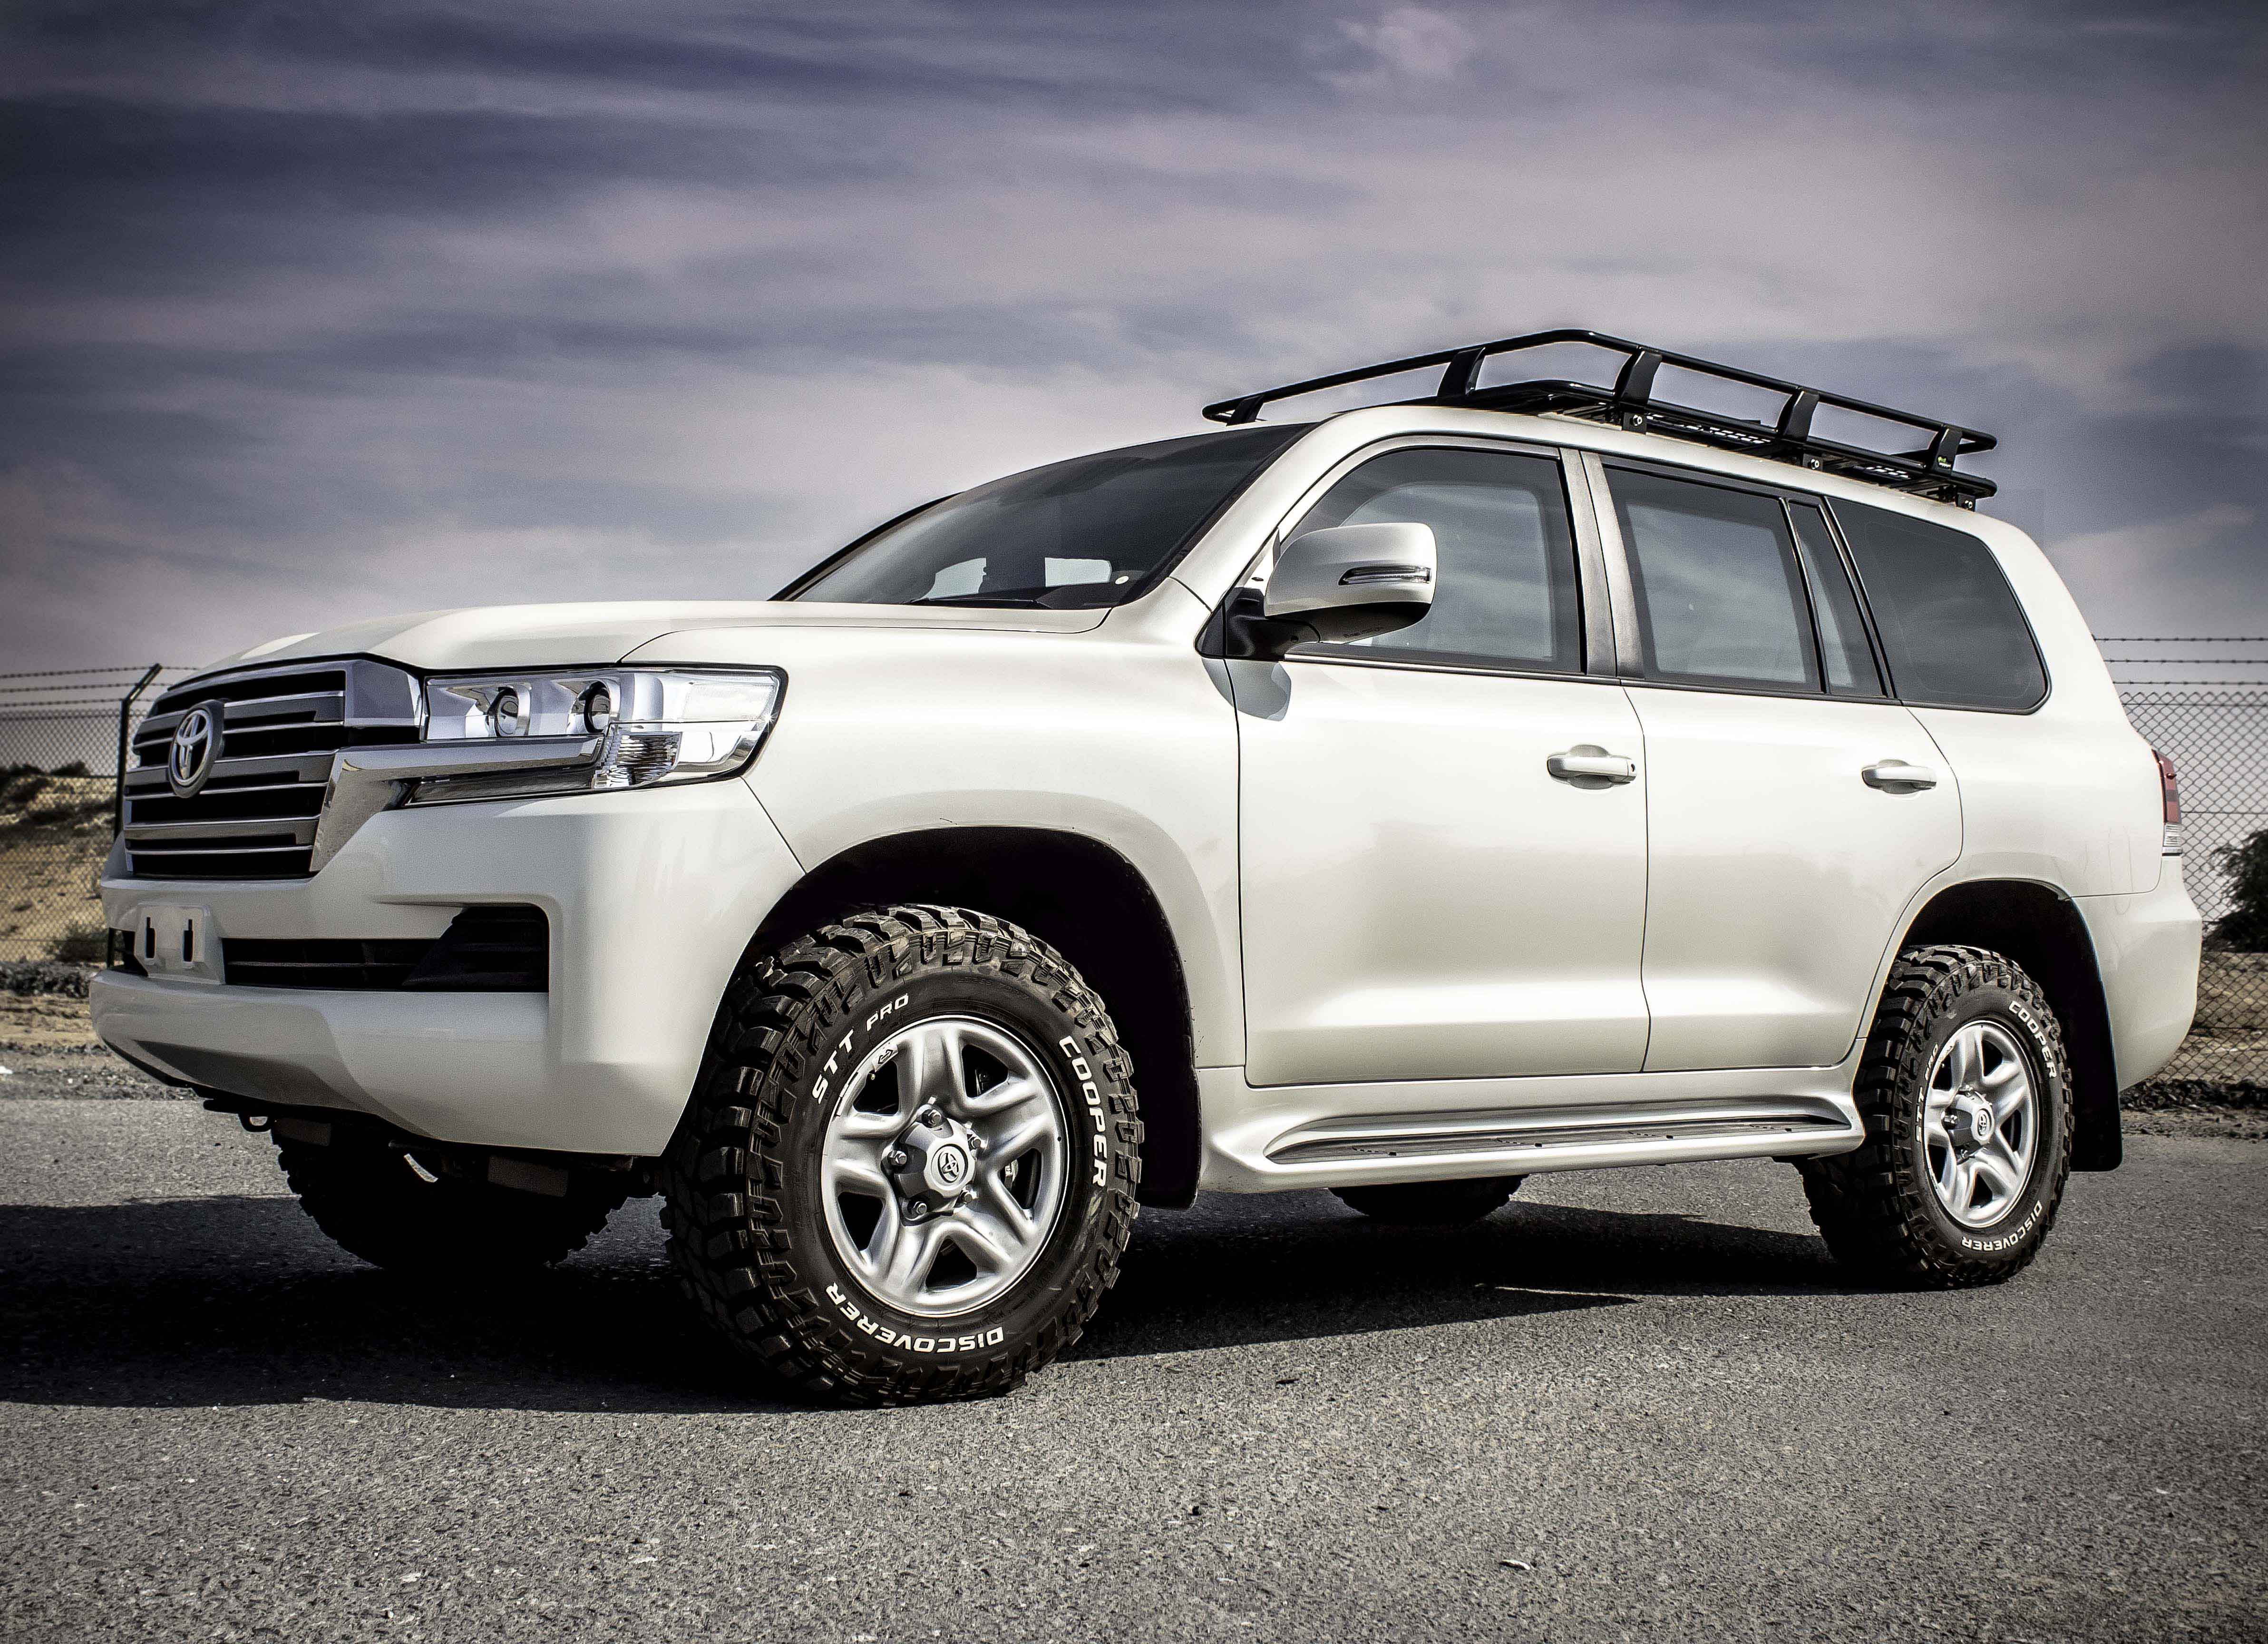 Armoured Toyota Land Cruiser 200 Tested And Certified